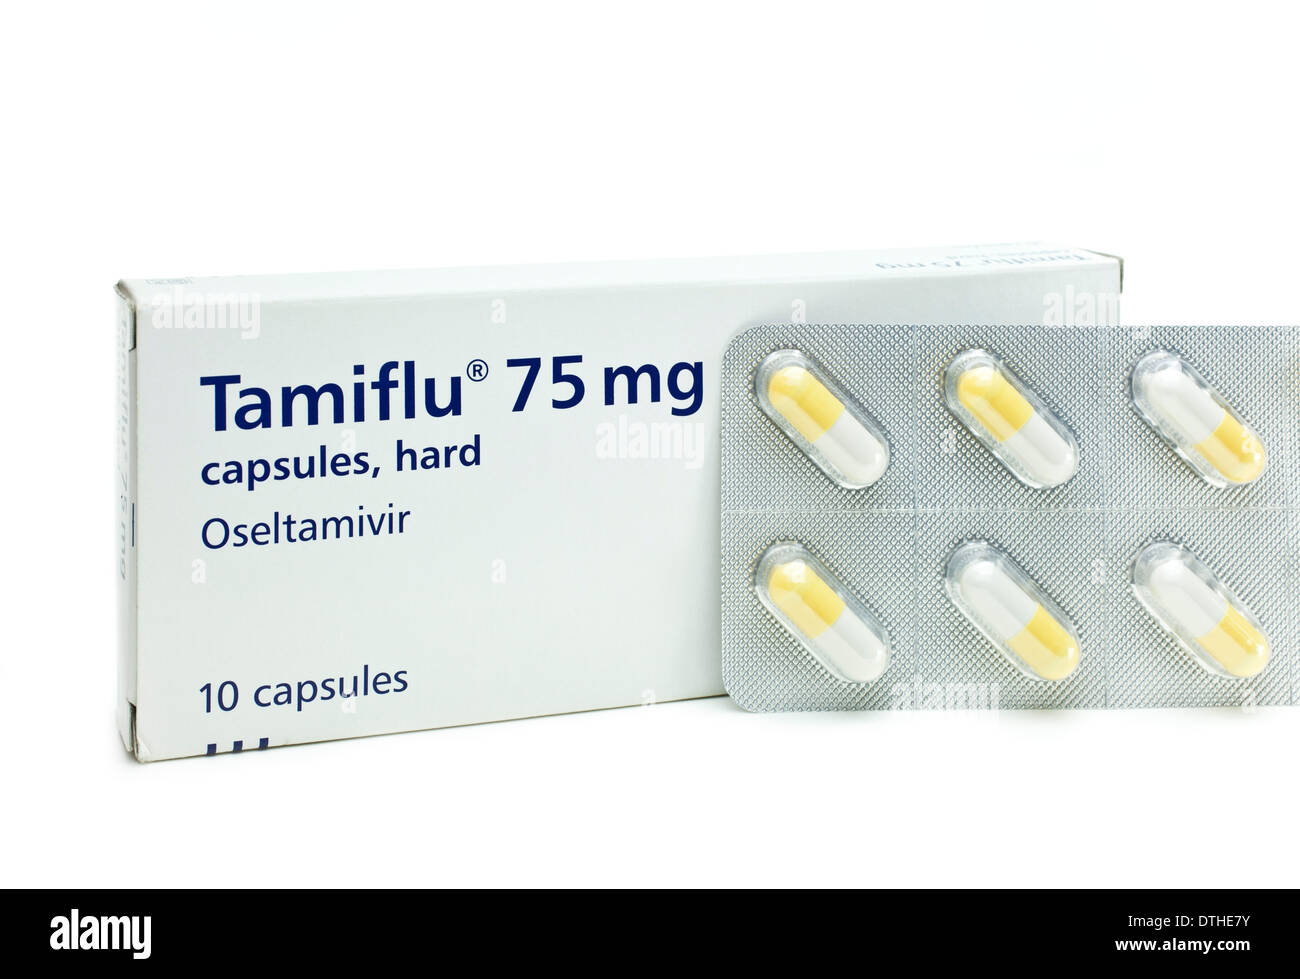 Yellow and white Tamiflu capsules in a blister pack next to a box of Tamiflu on a white background Stock Photo